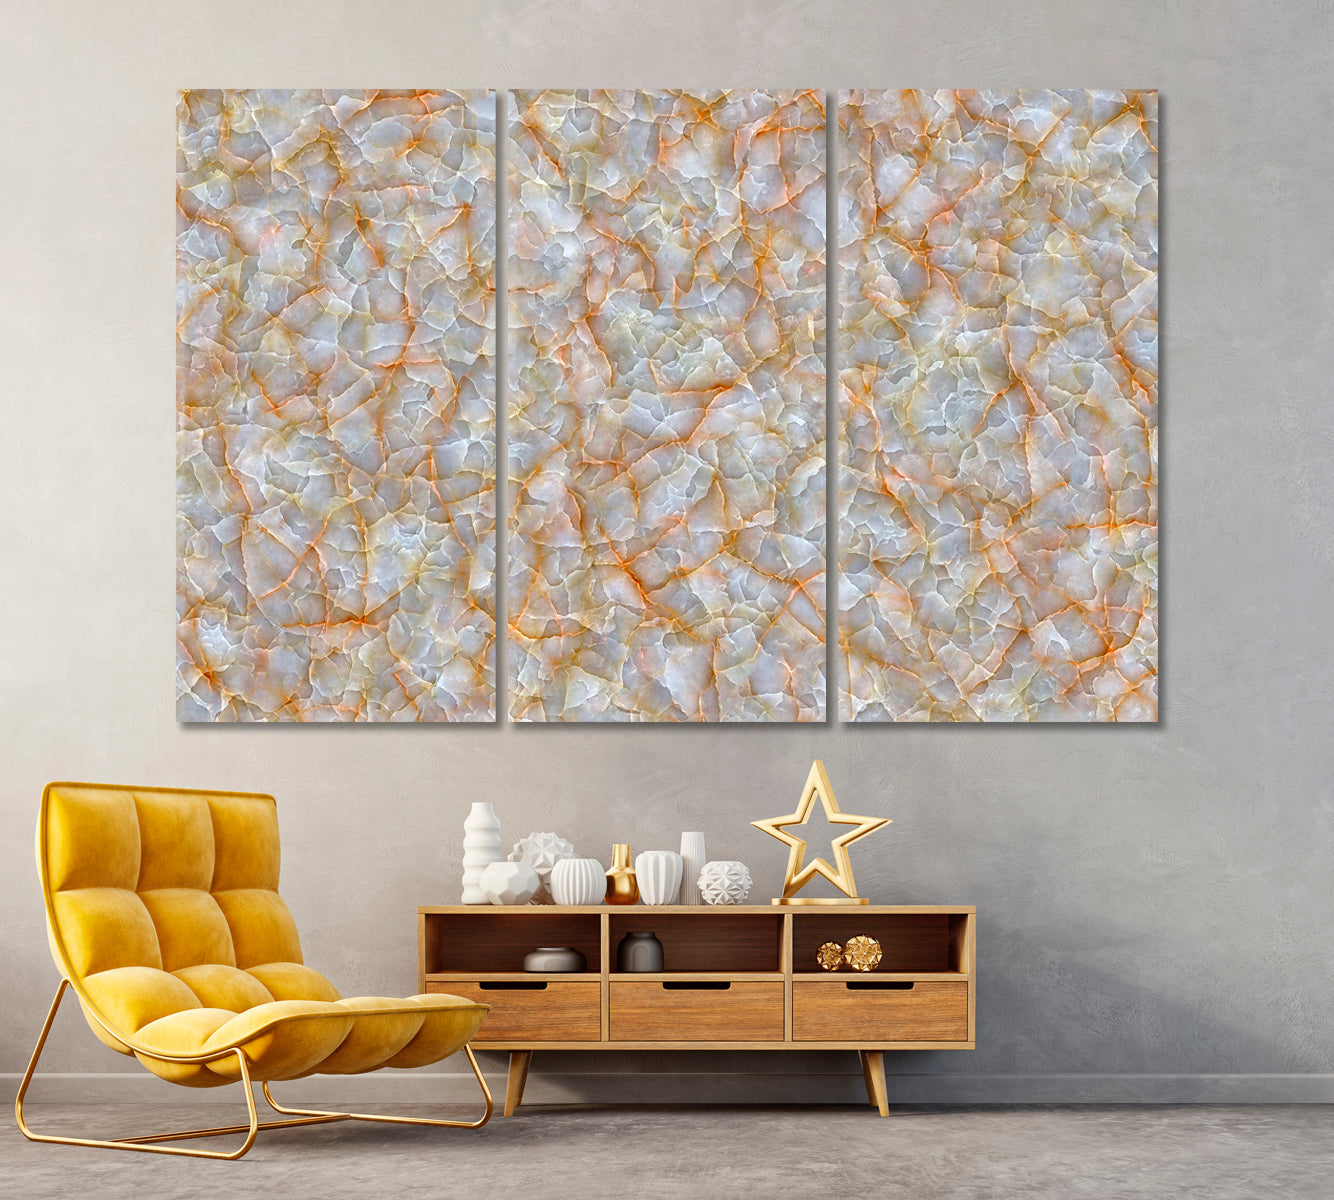 Cracked Marble Pattern Canvas Print ArtLexy 3 Panels 36"x24" inches 